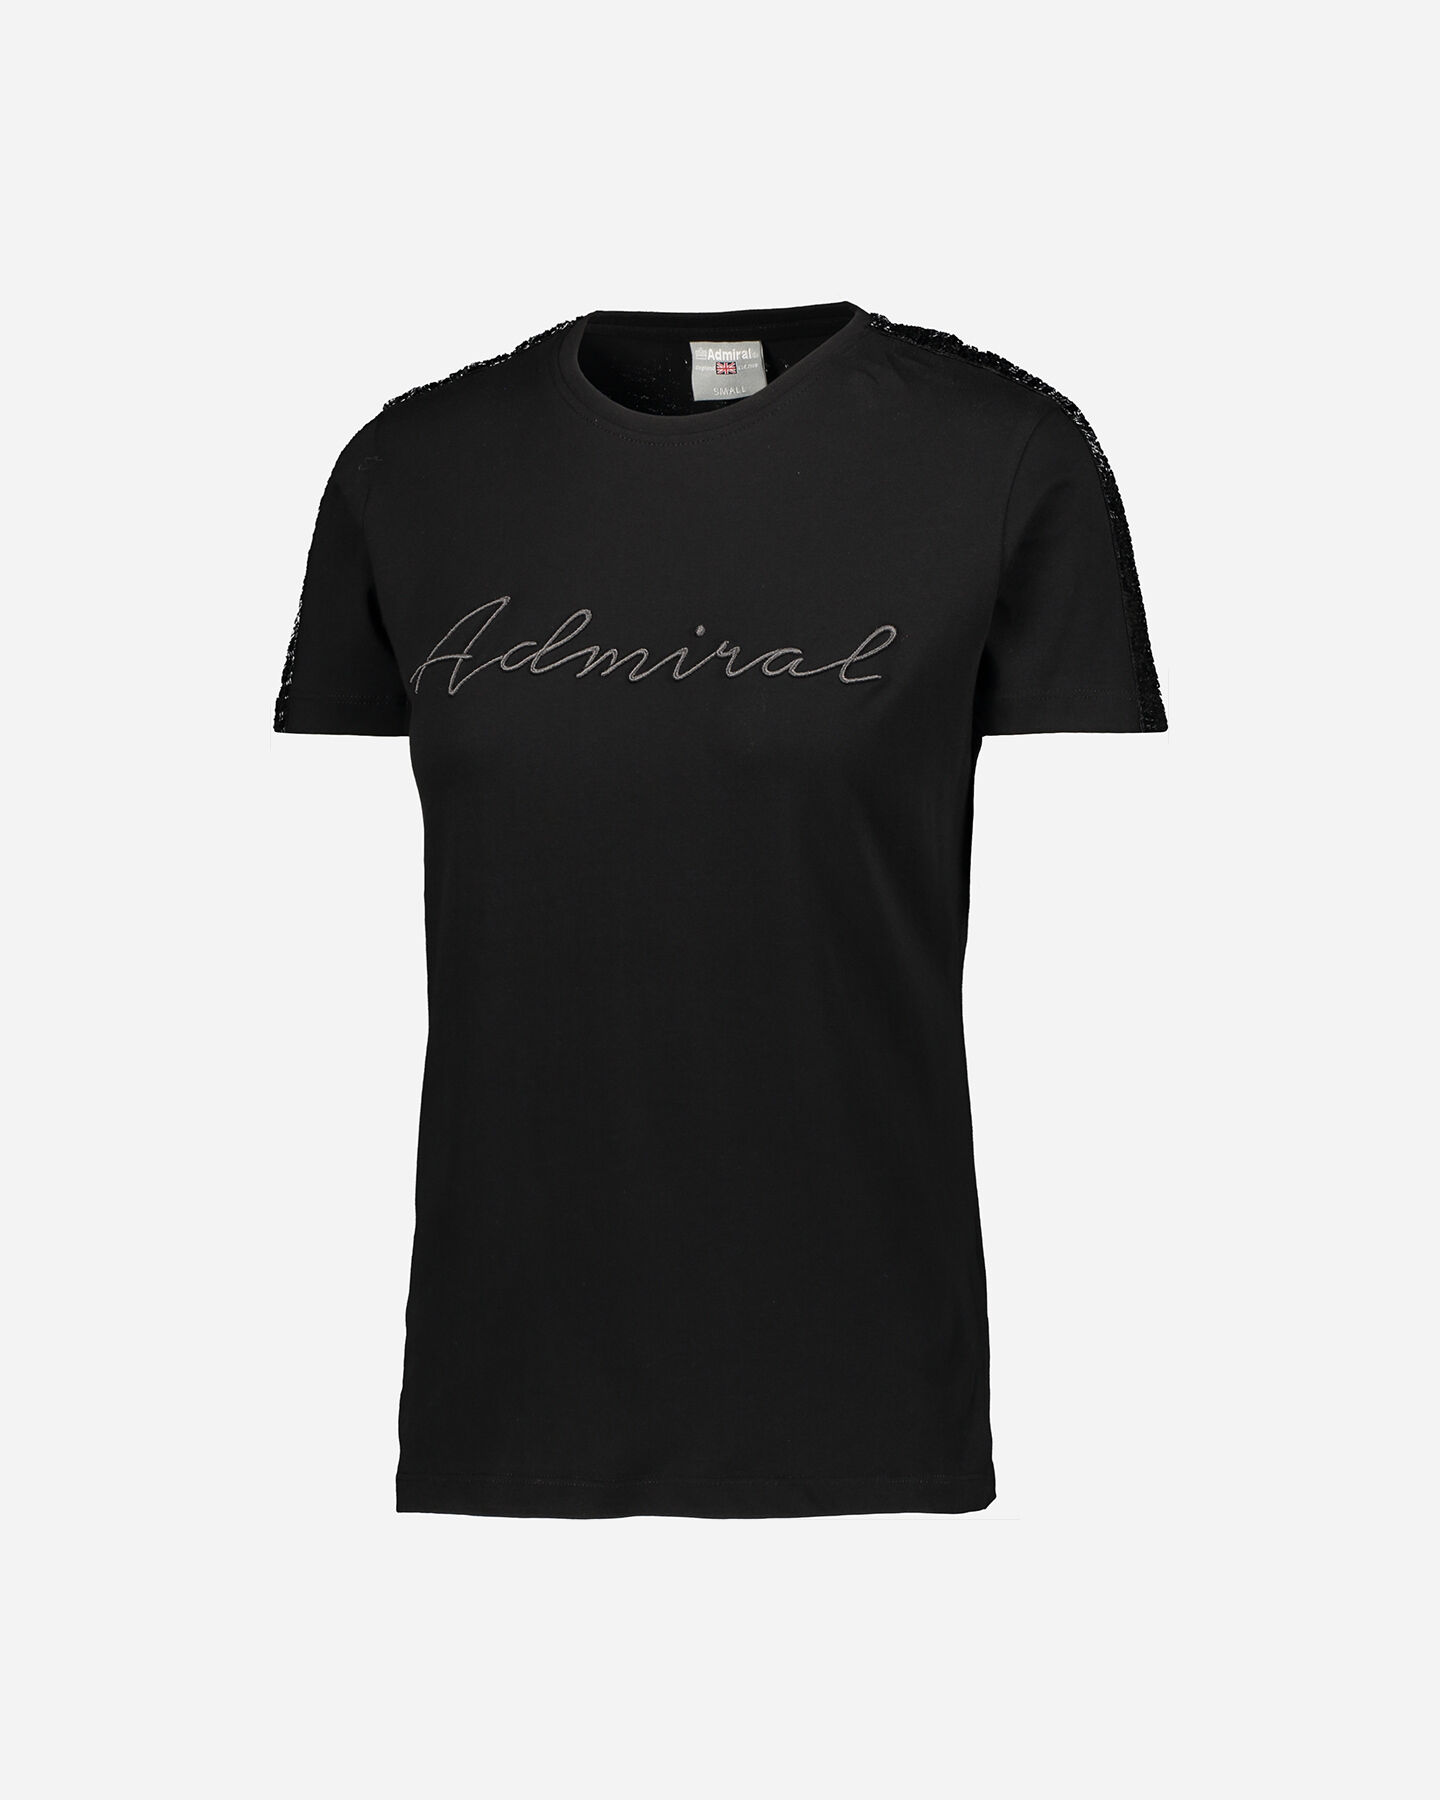  T-Shirt ADMIRAL TAPE PAILLET W S4080449|050|S scatto 0